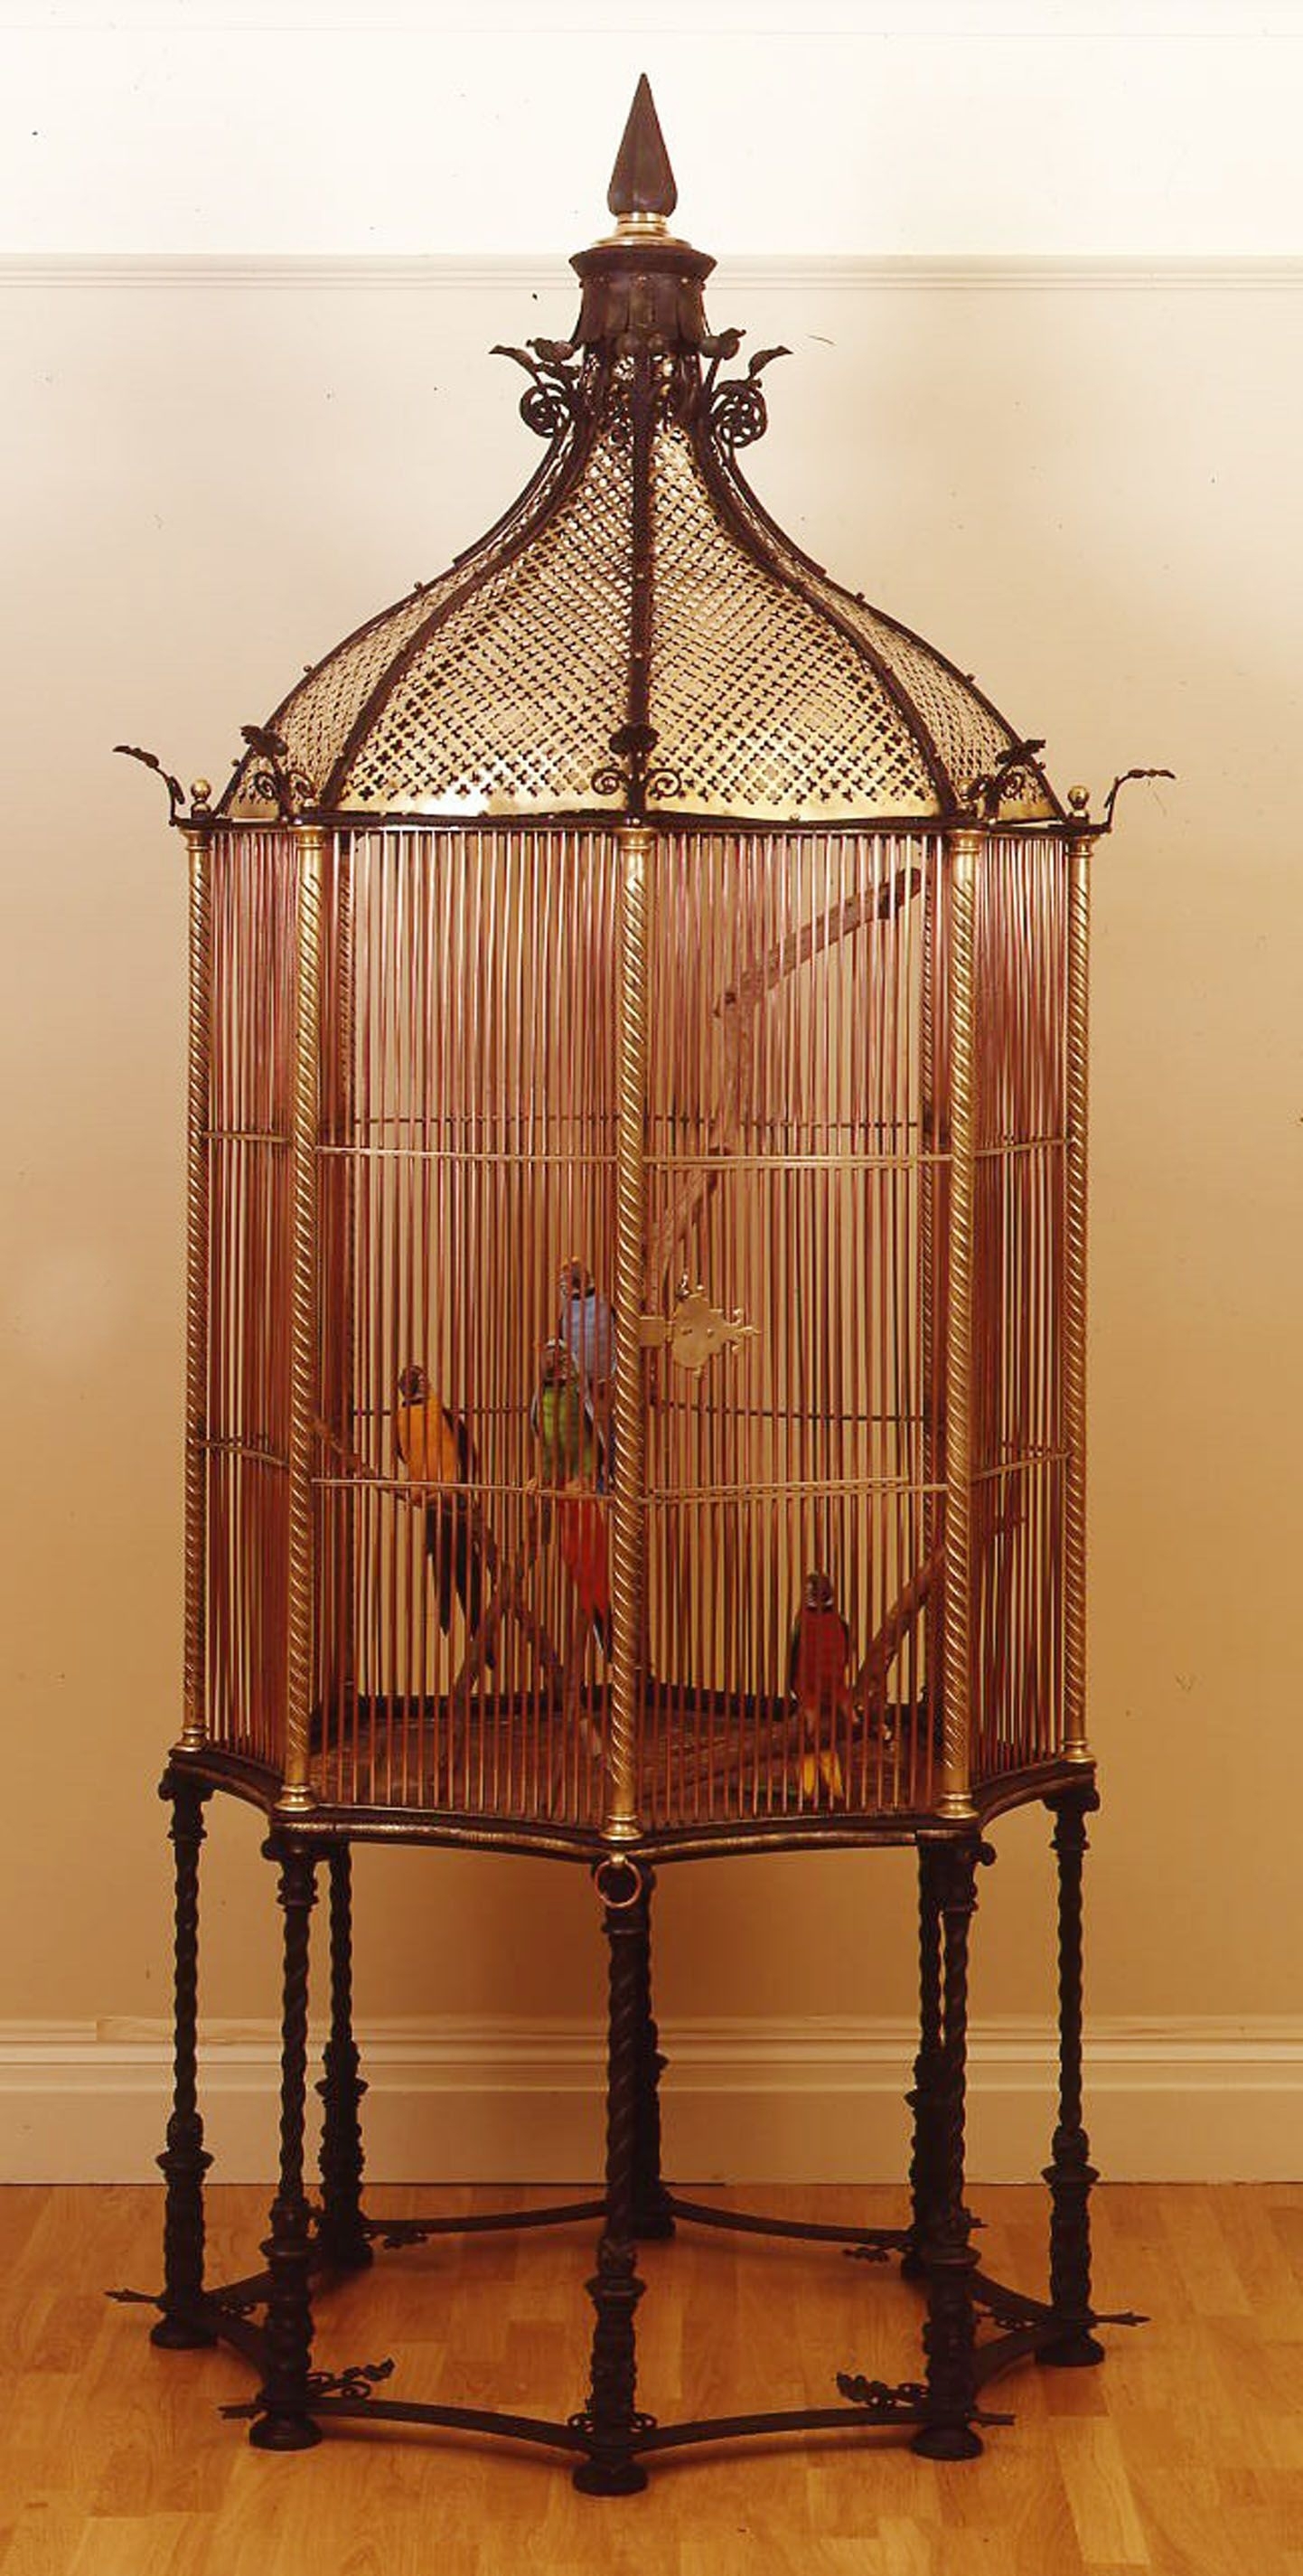 Vintage Brass Bird Cage with Swinging Bird and Stick Lock Home